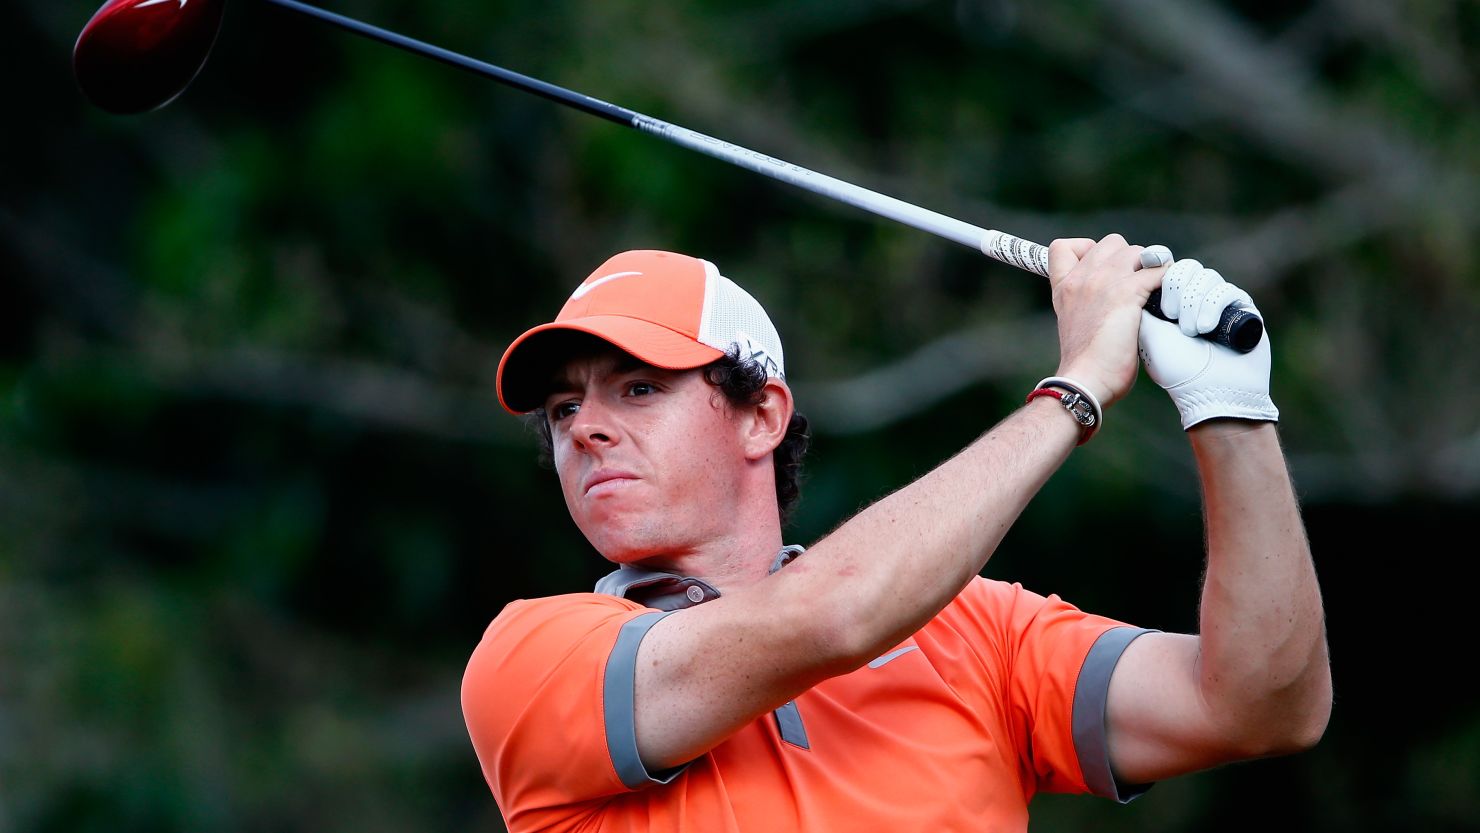 Rory McIlroy finished at the top of the leaderboard after day one of the Honda Classic in Florida.